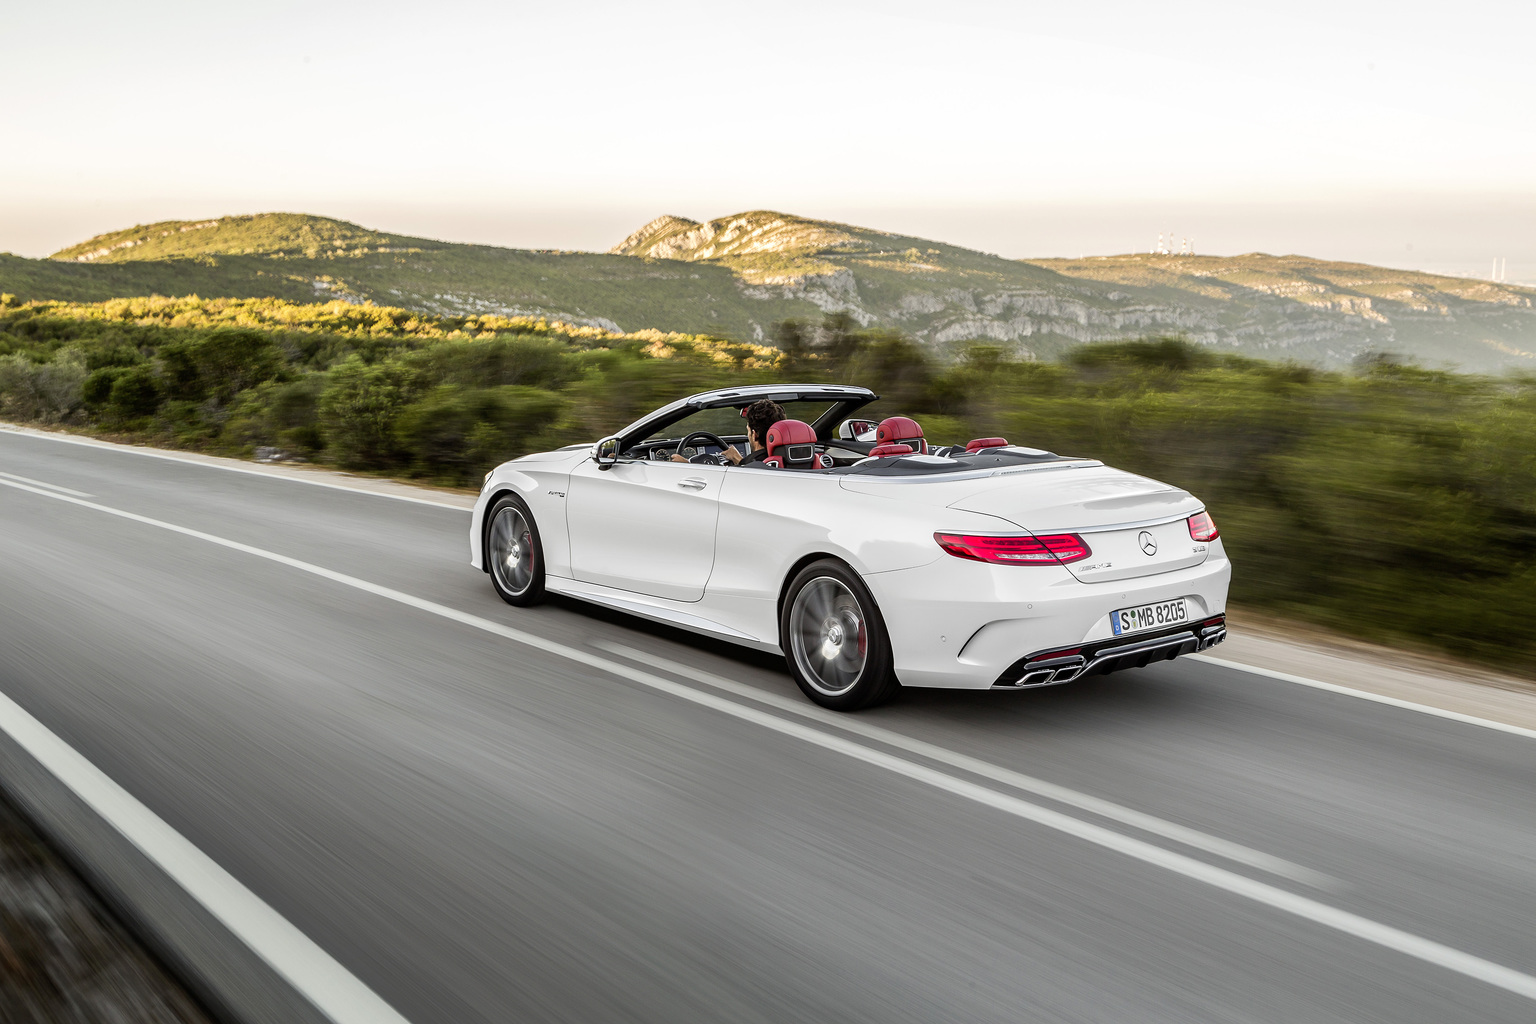 2016 Mercedes-AMG S 63 4MATIC Cabriolet